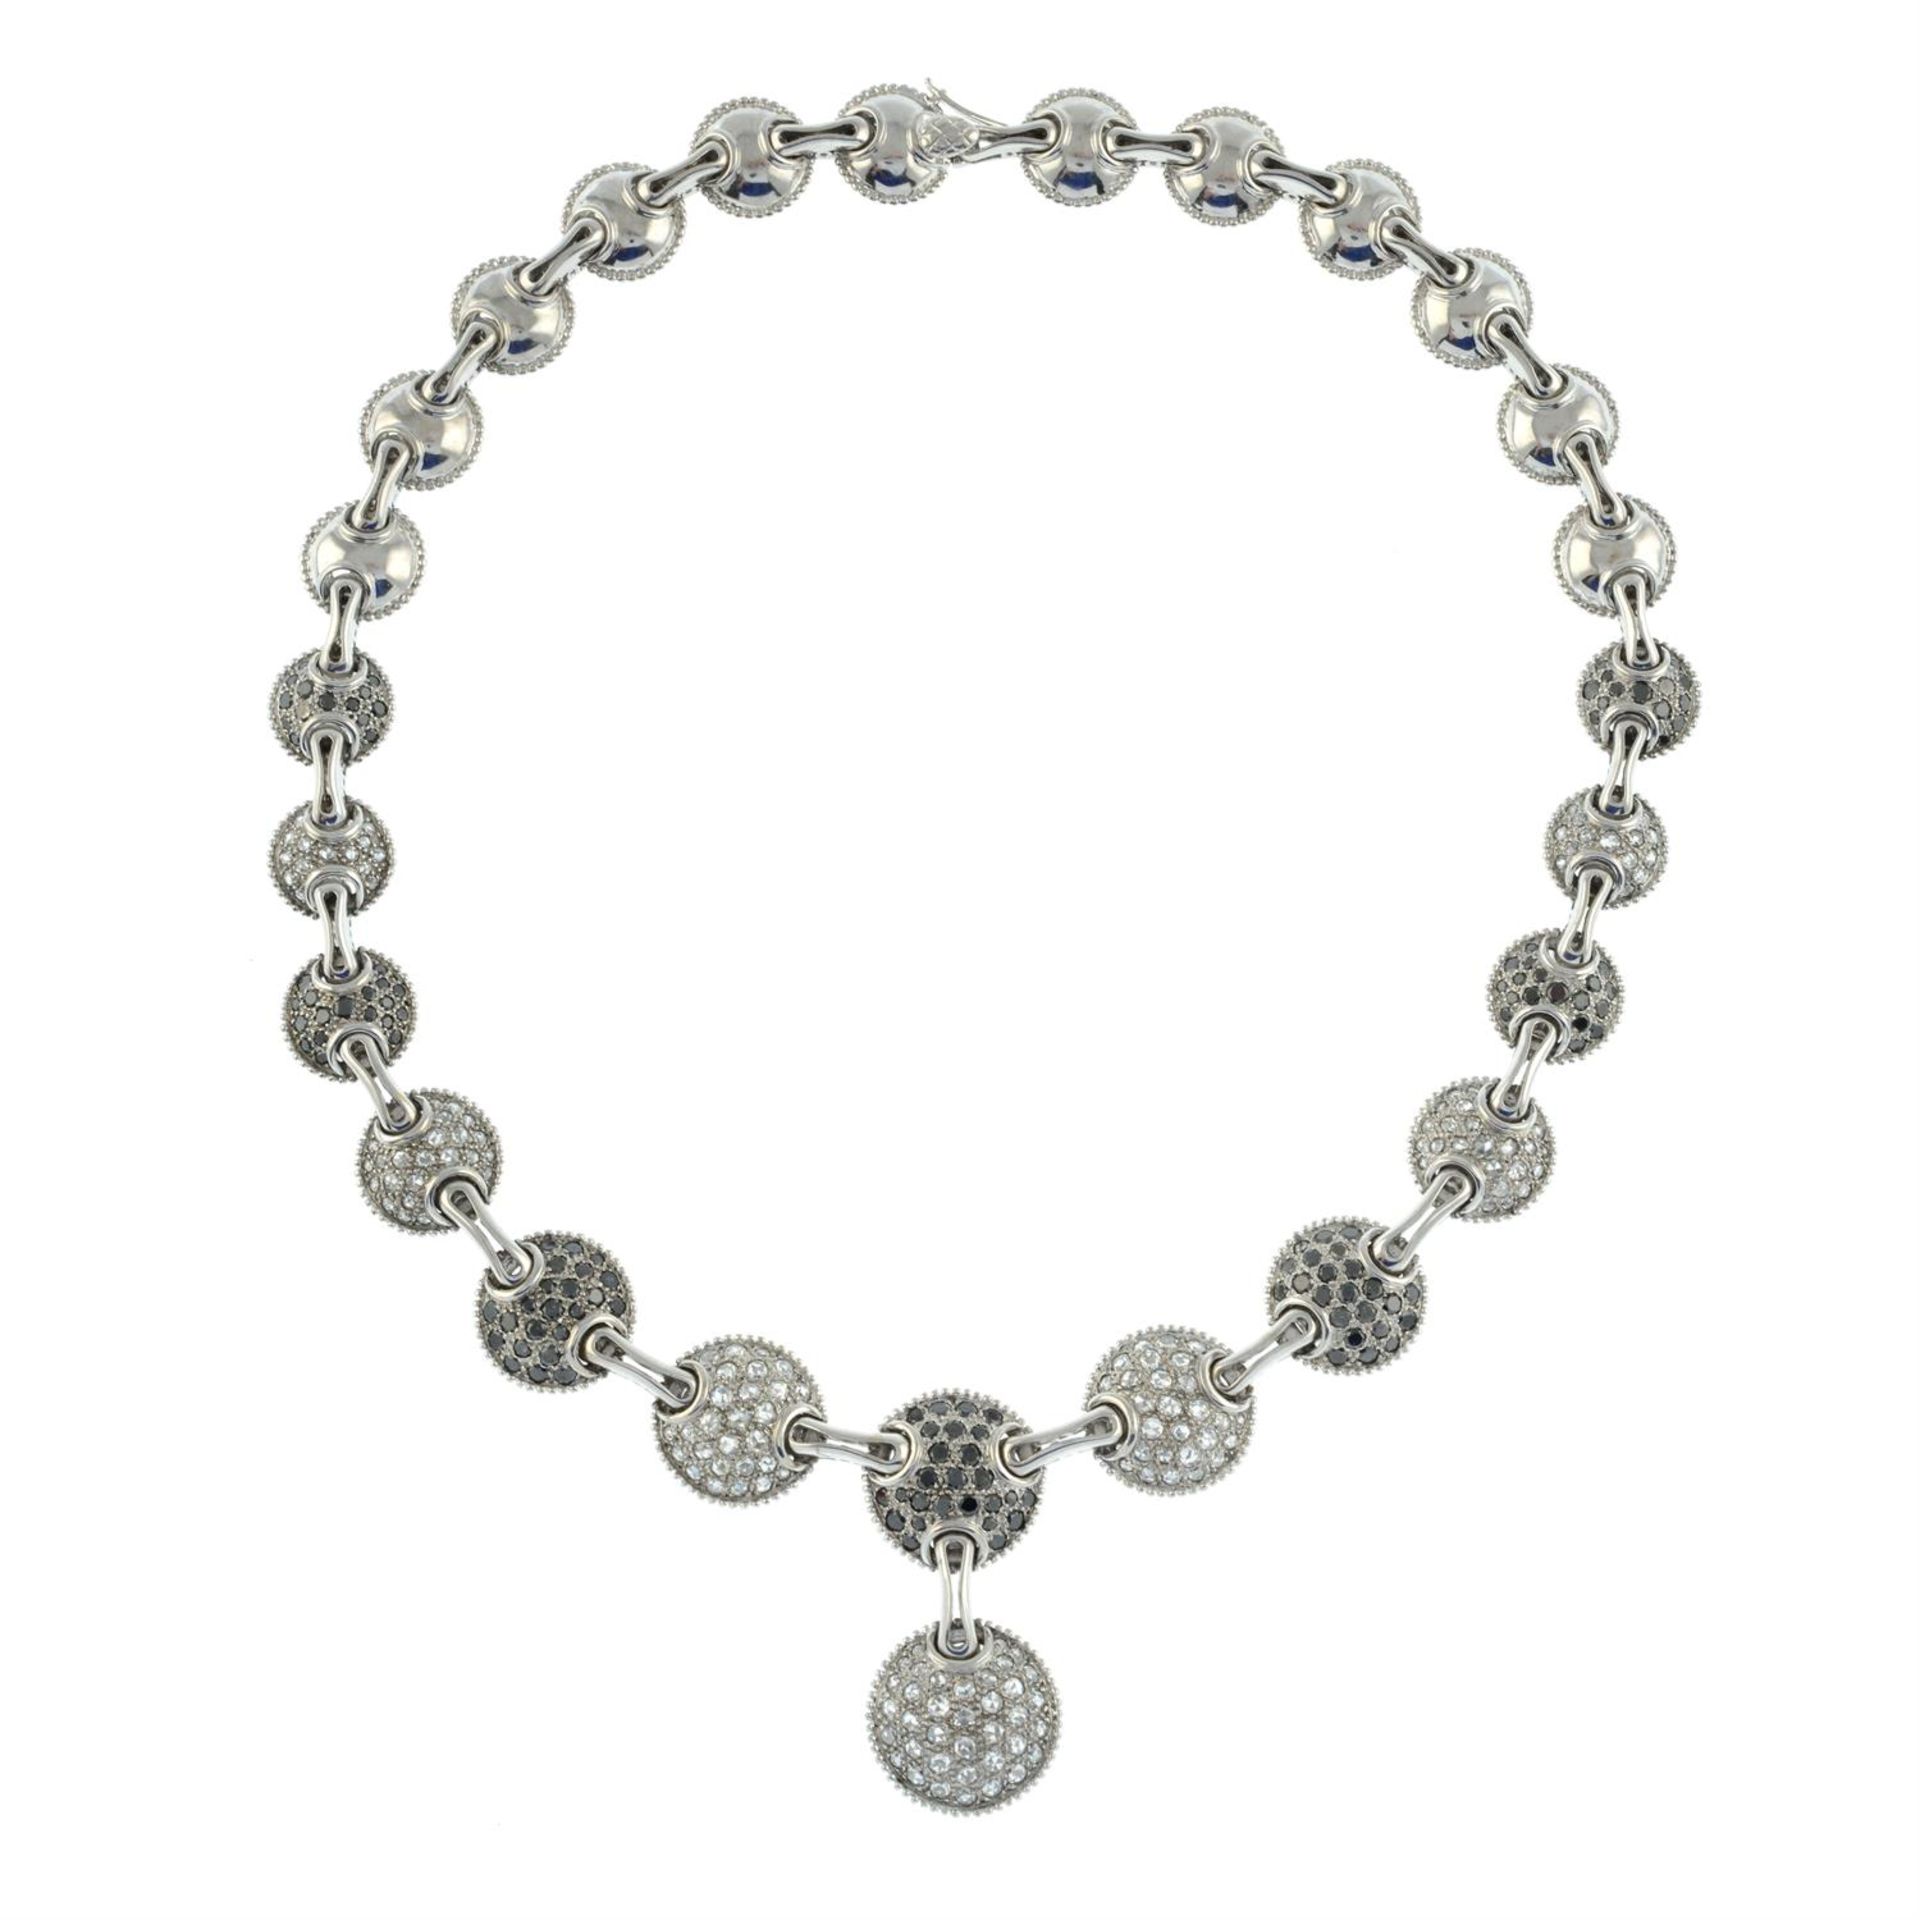 Diamond & gem necklace, by Mouawad - Image 2 of 4